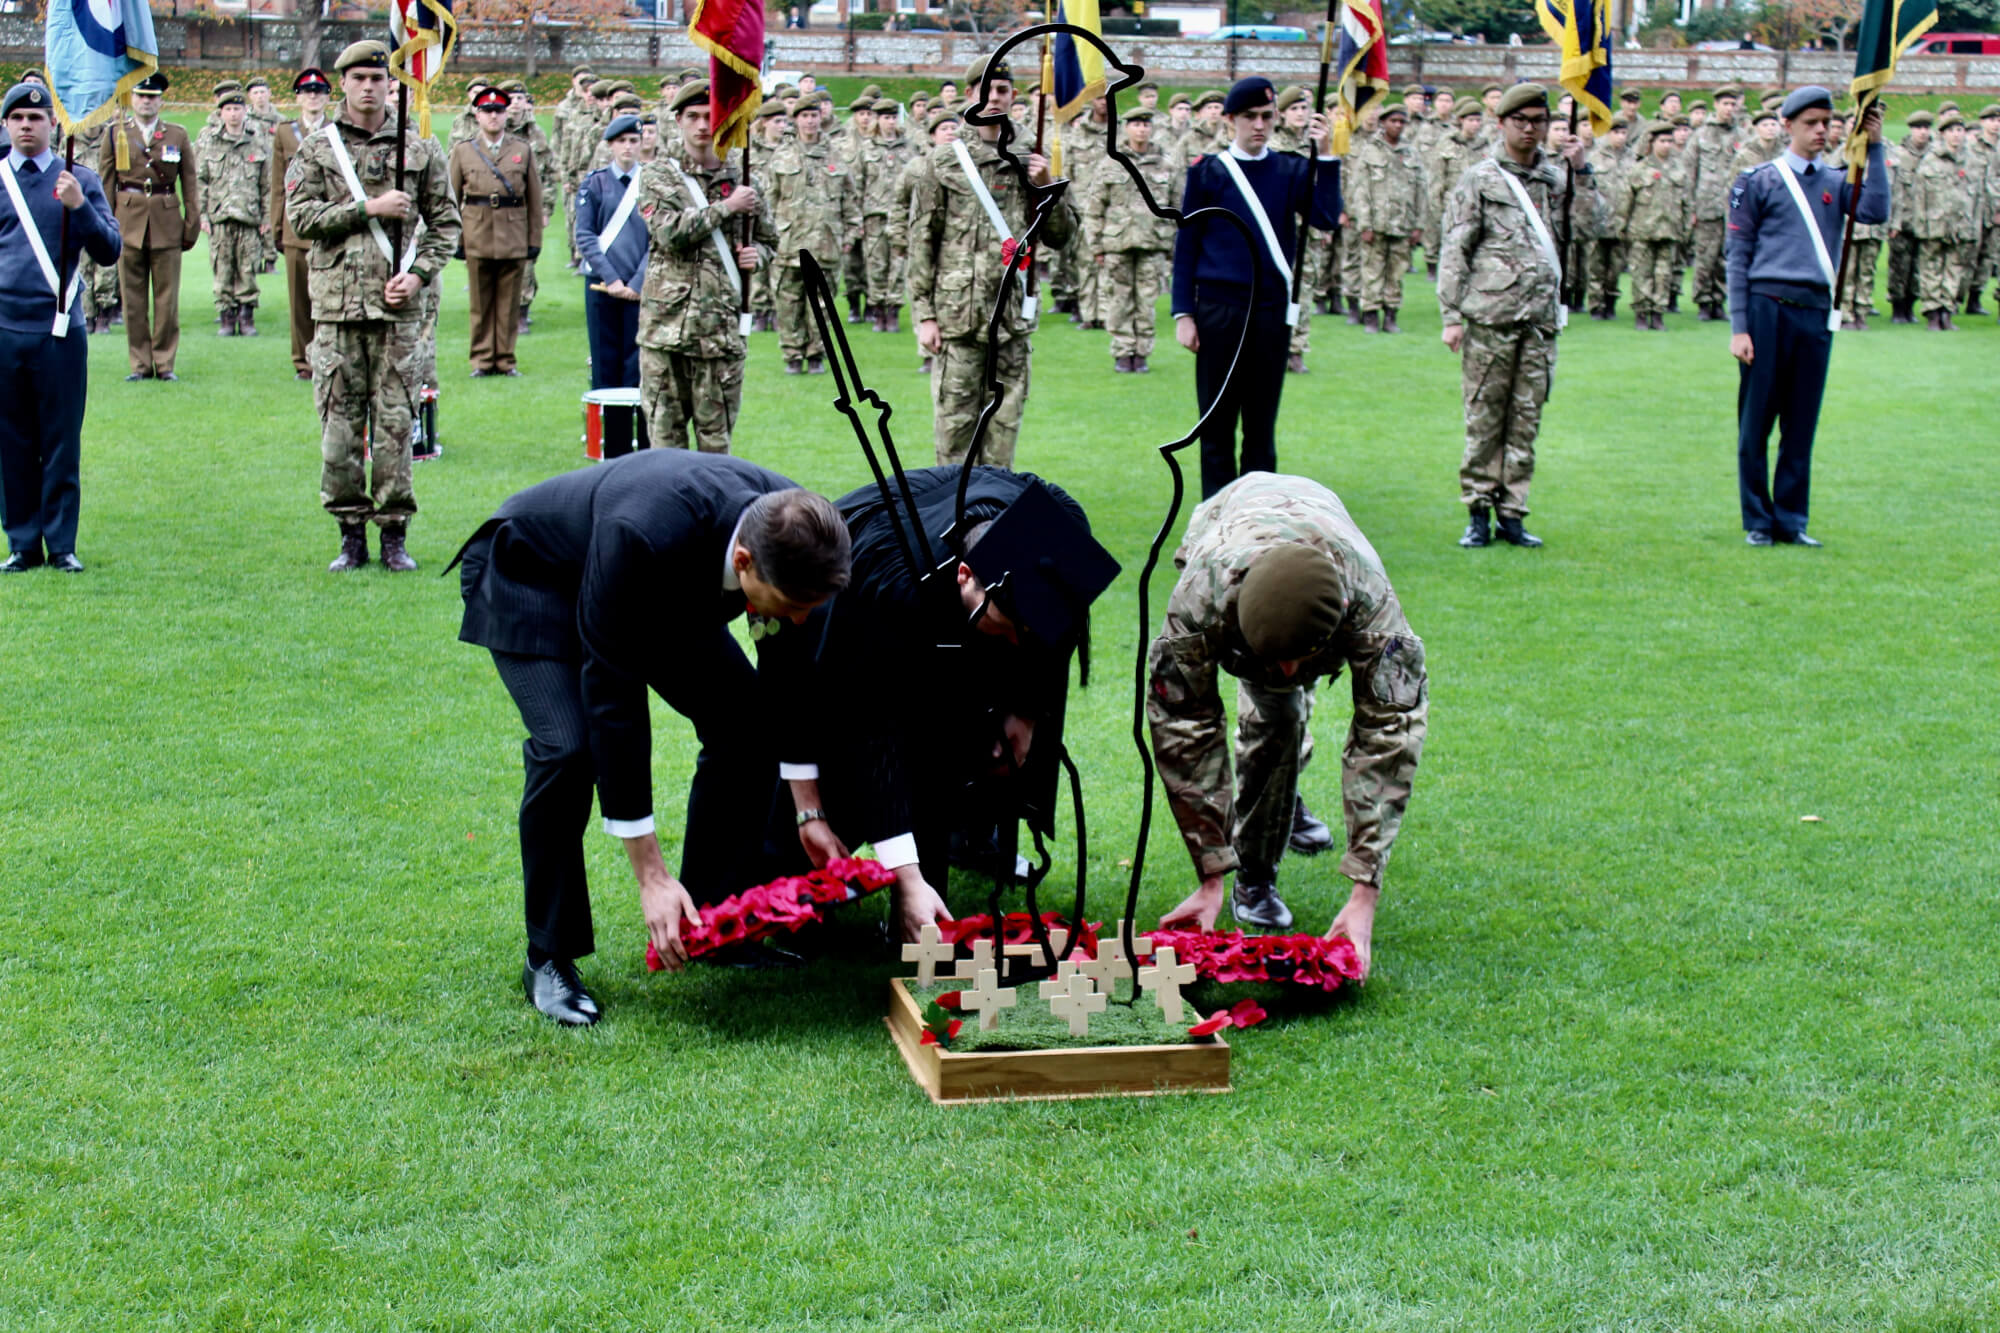 left to right: captain mark harris, the headmaster and a pupil lay wreaths at the feet of the fallen soldier